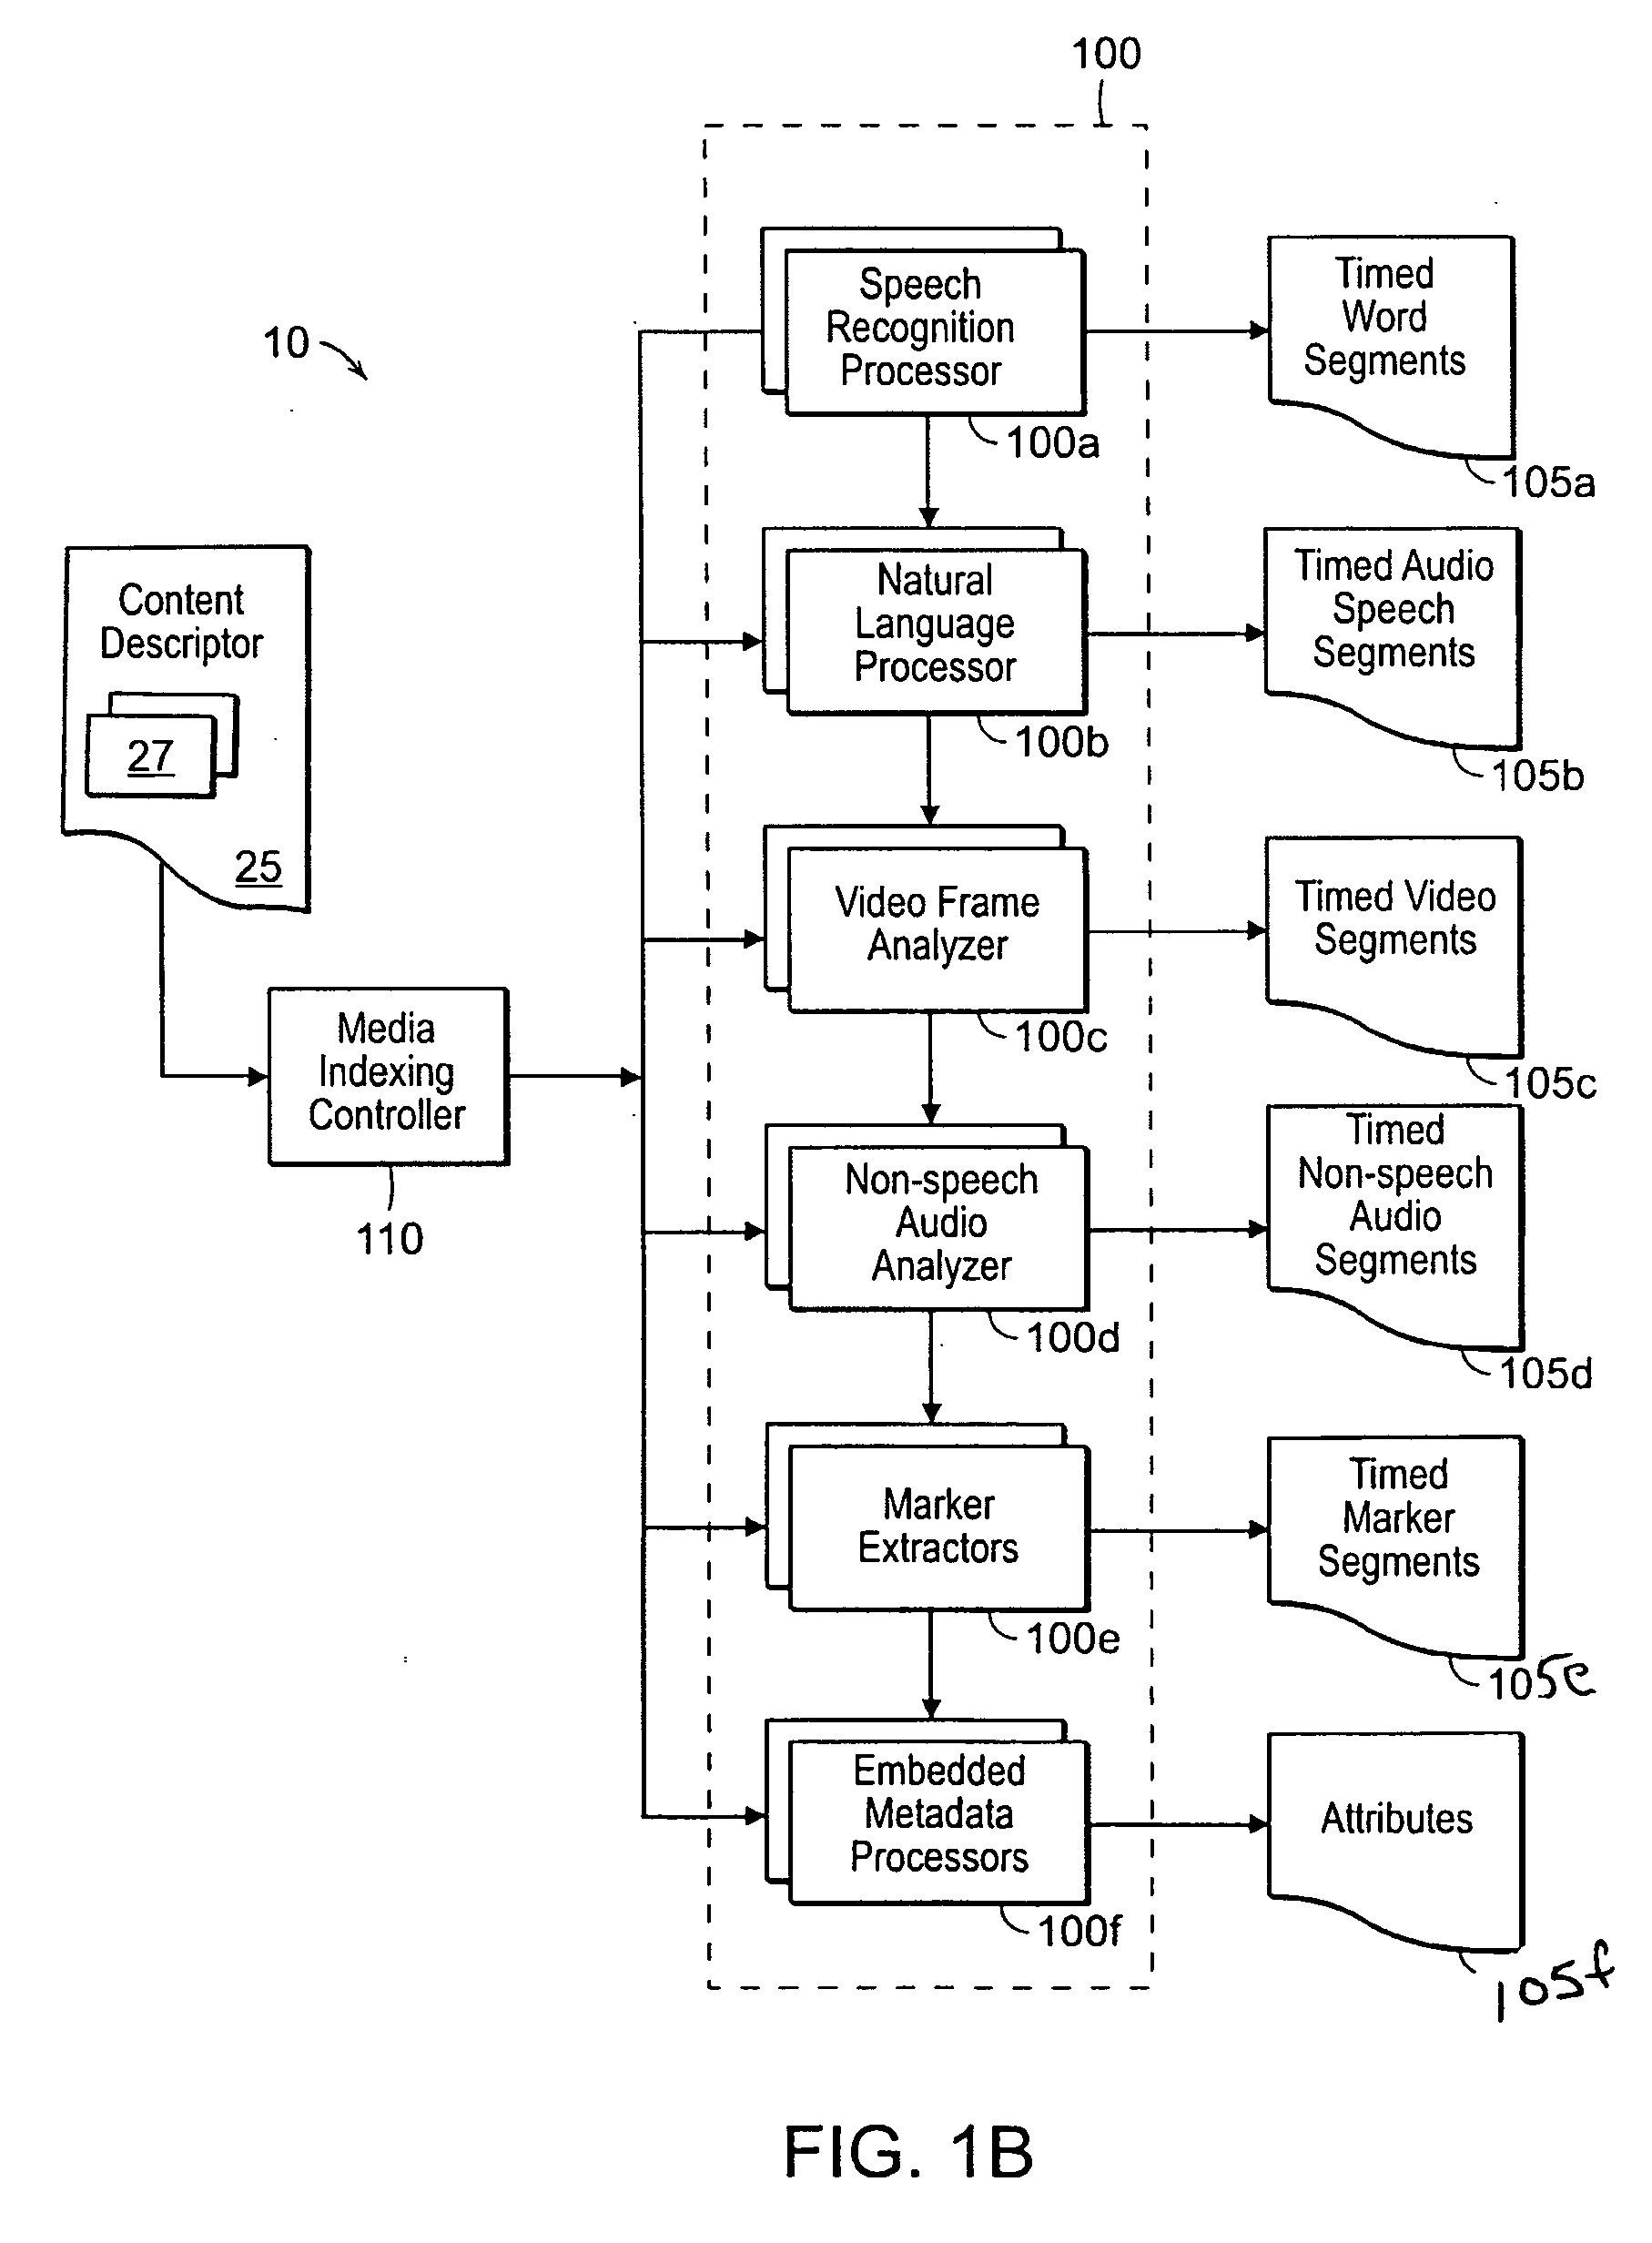 Method and apparatus for updating speech recognition databases and reindexing audio and video content using the same